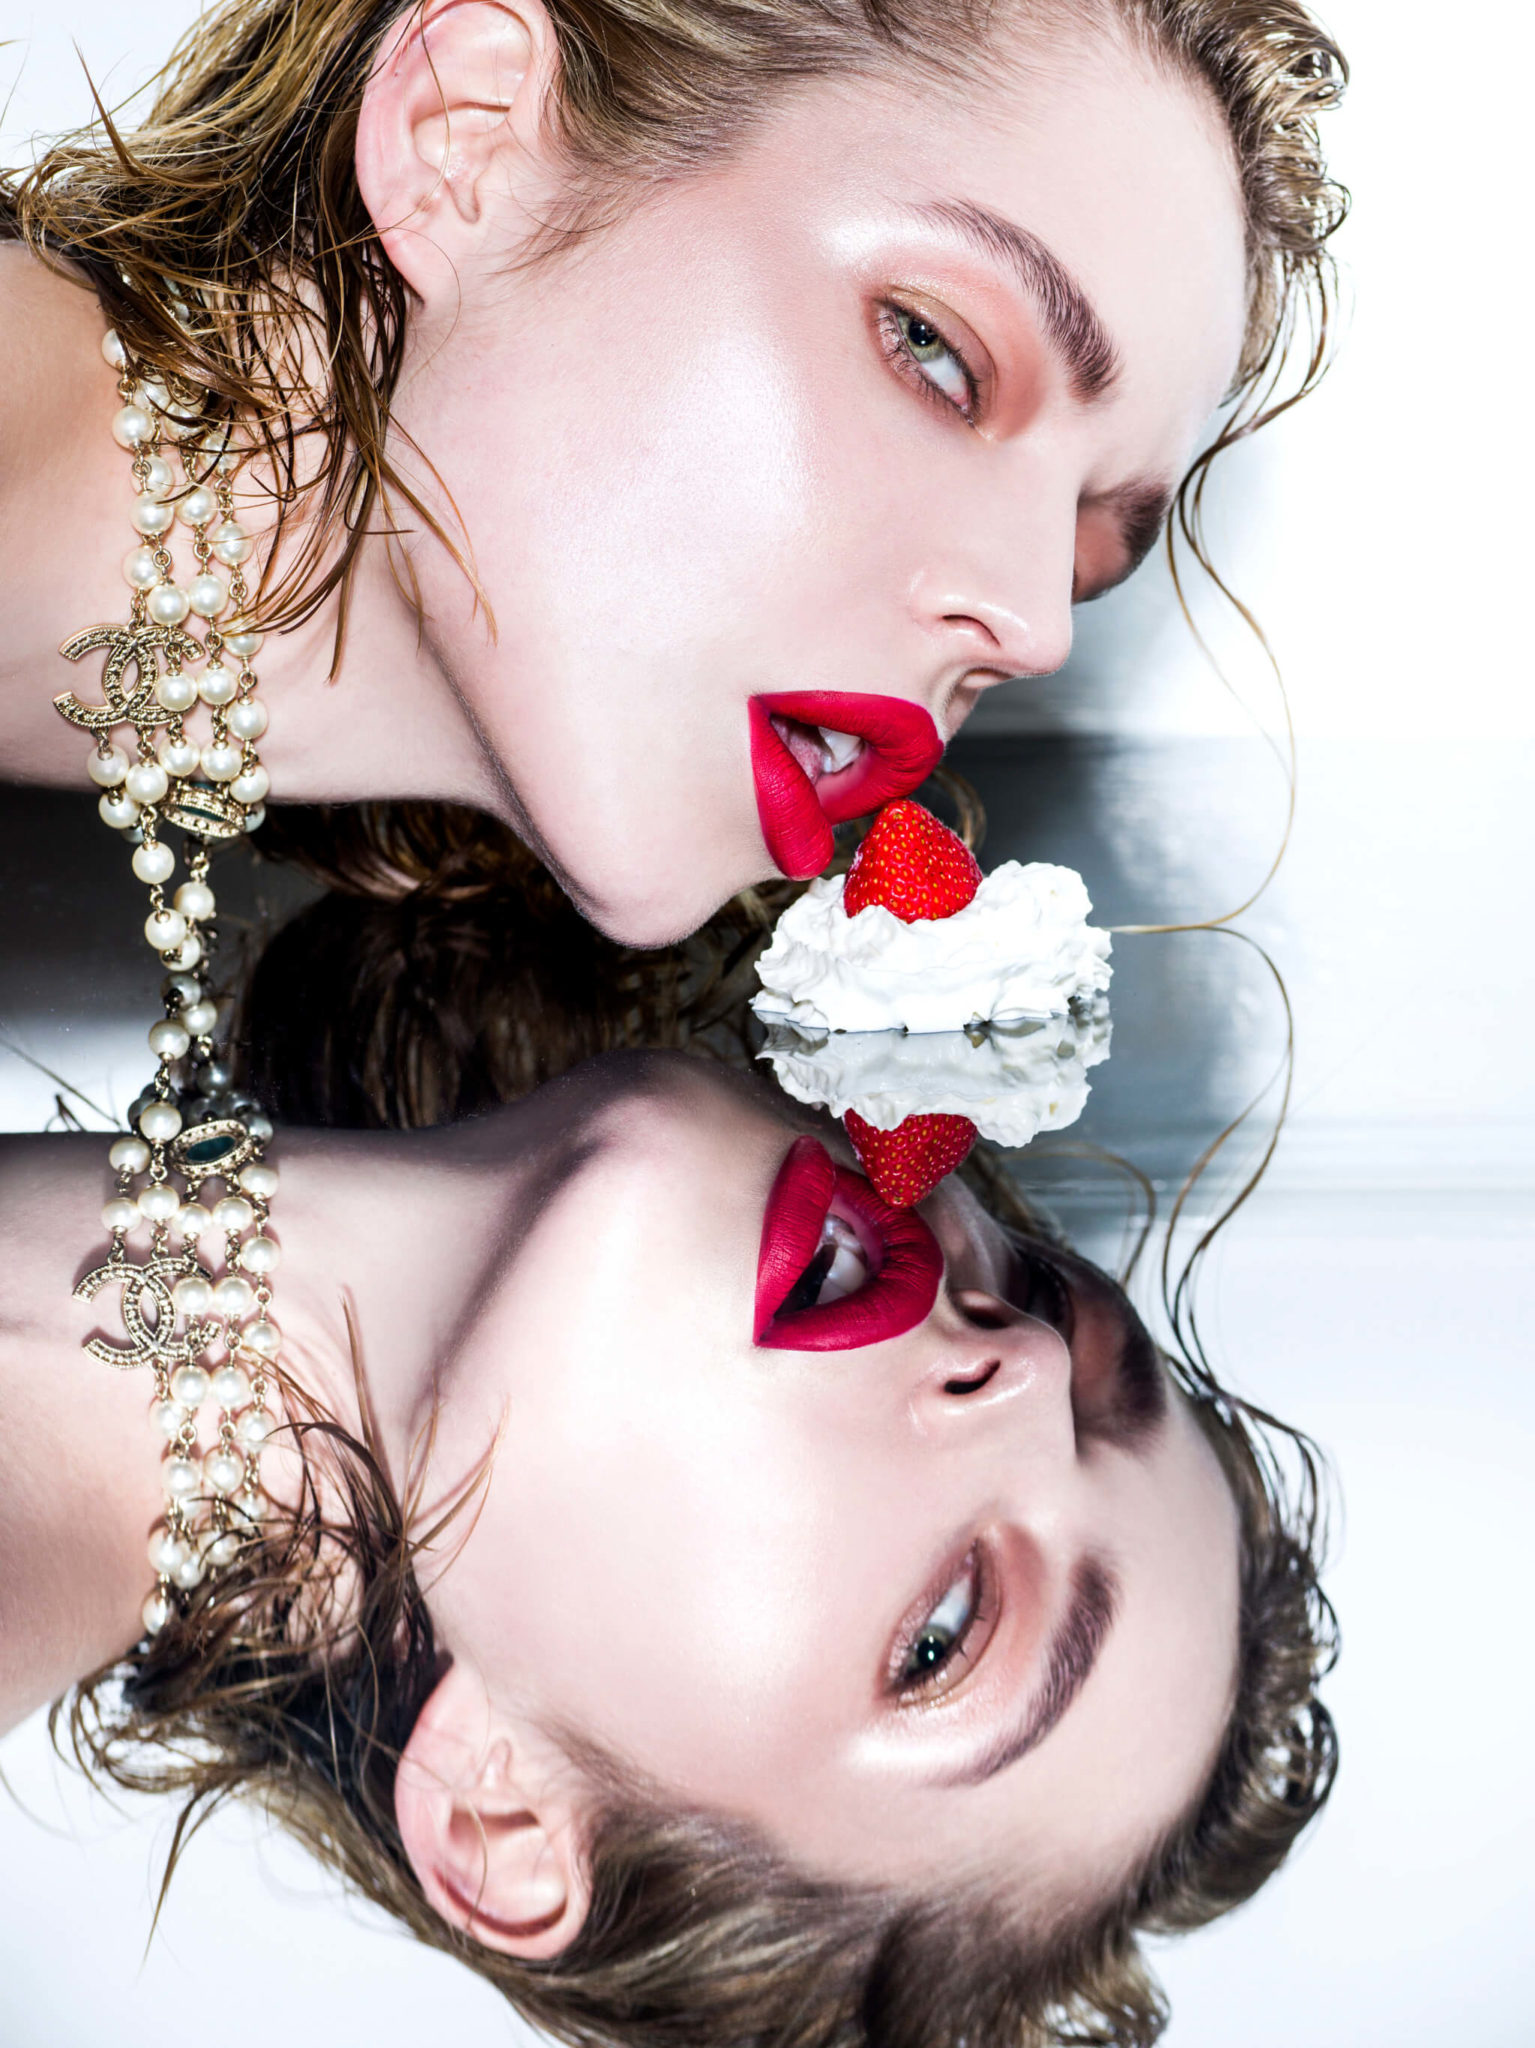 Red Lips and Model eating a strawberry